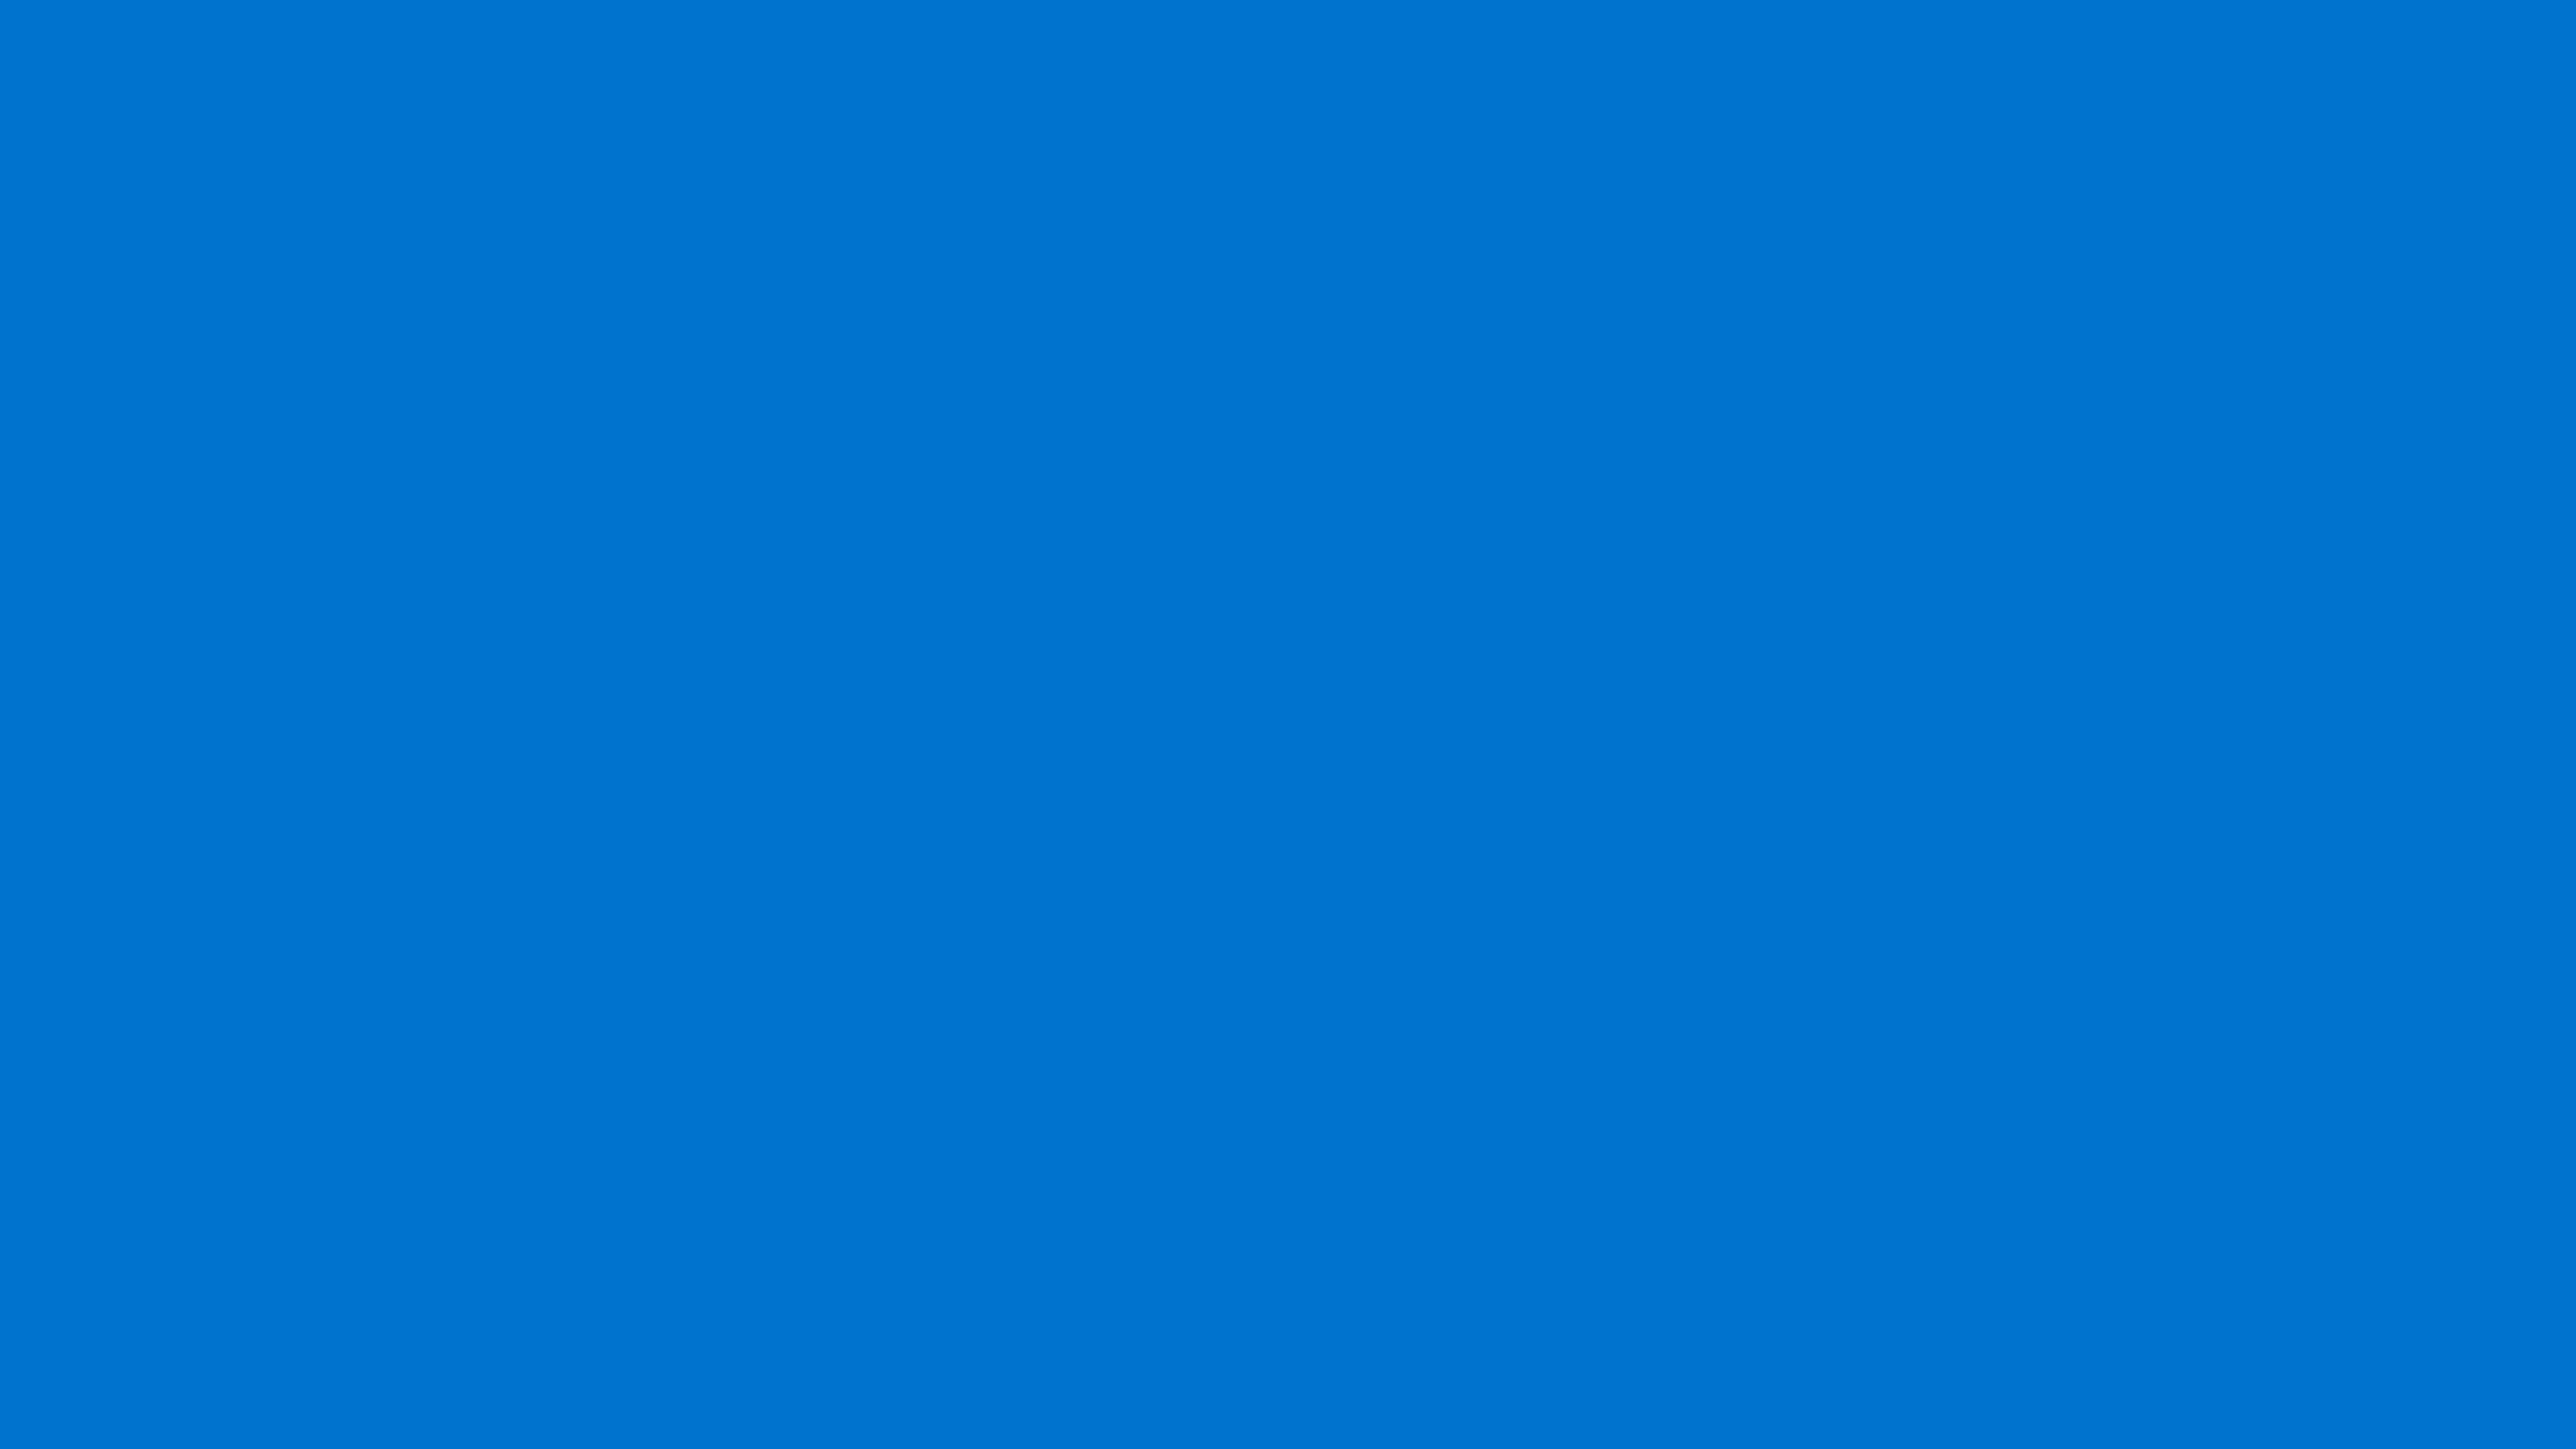 5120x2880 True Blue Solid Color Background